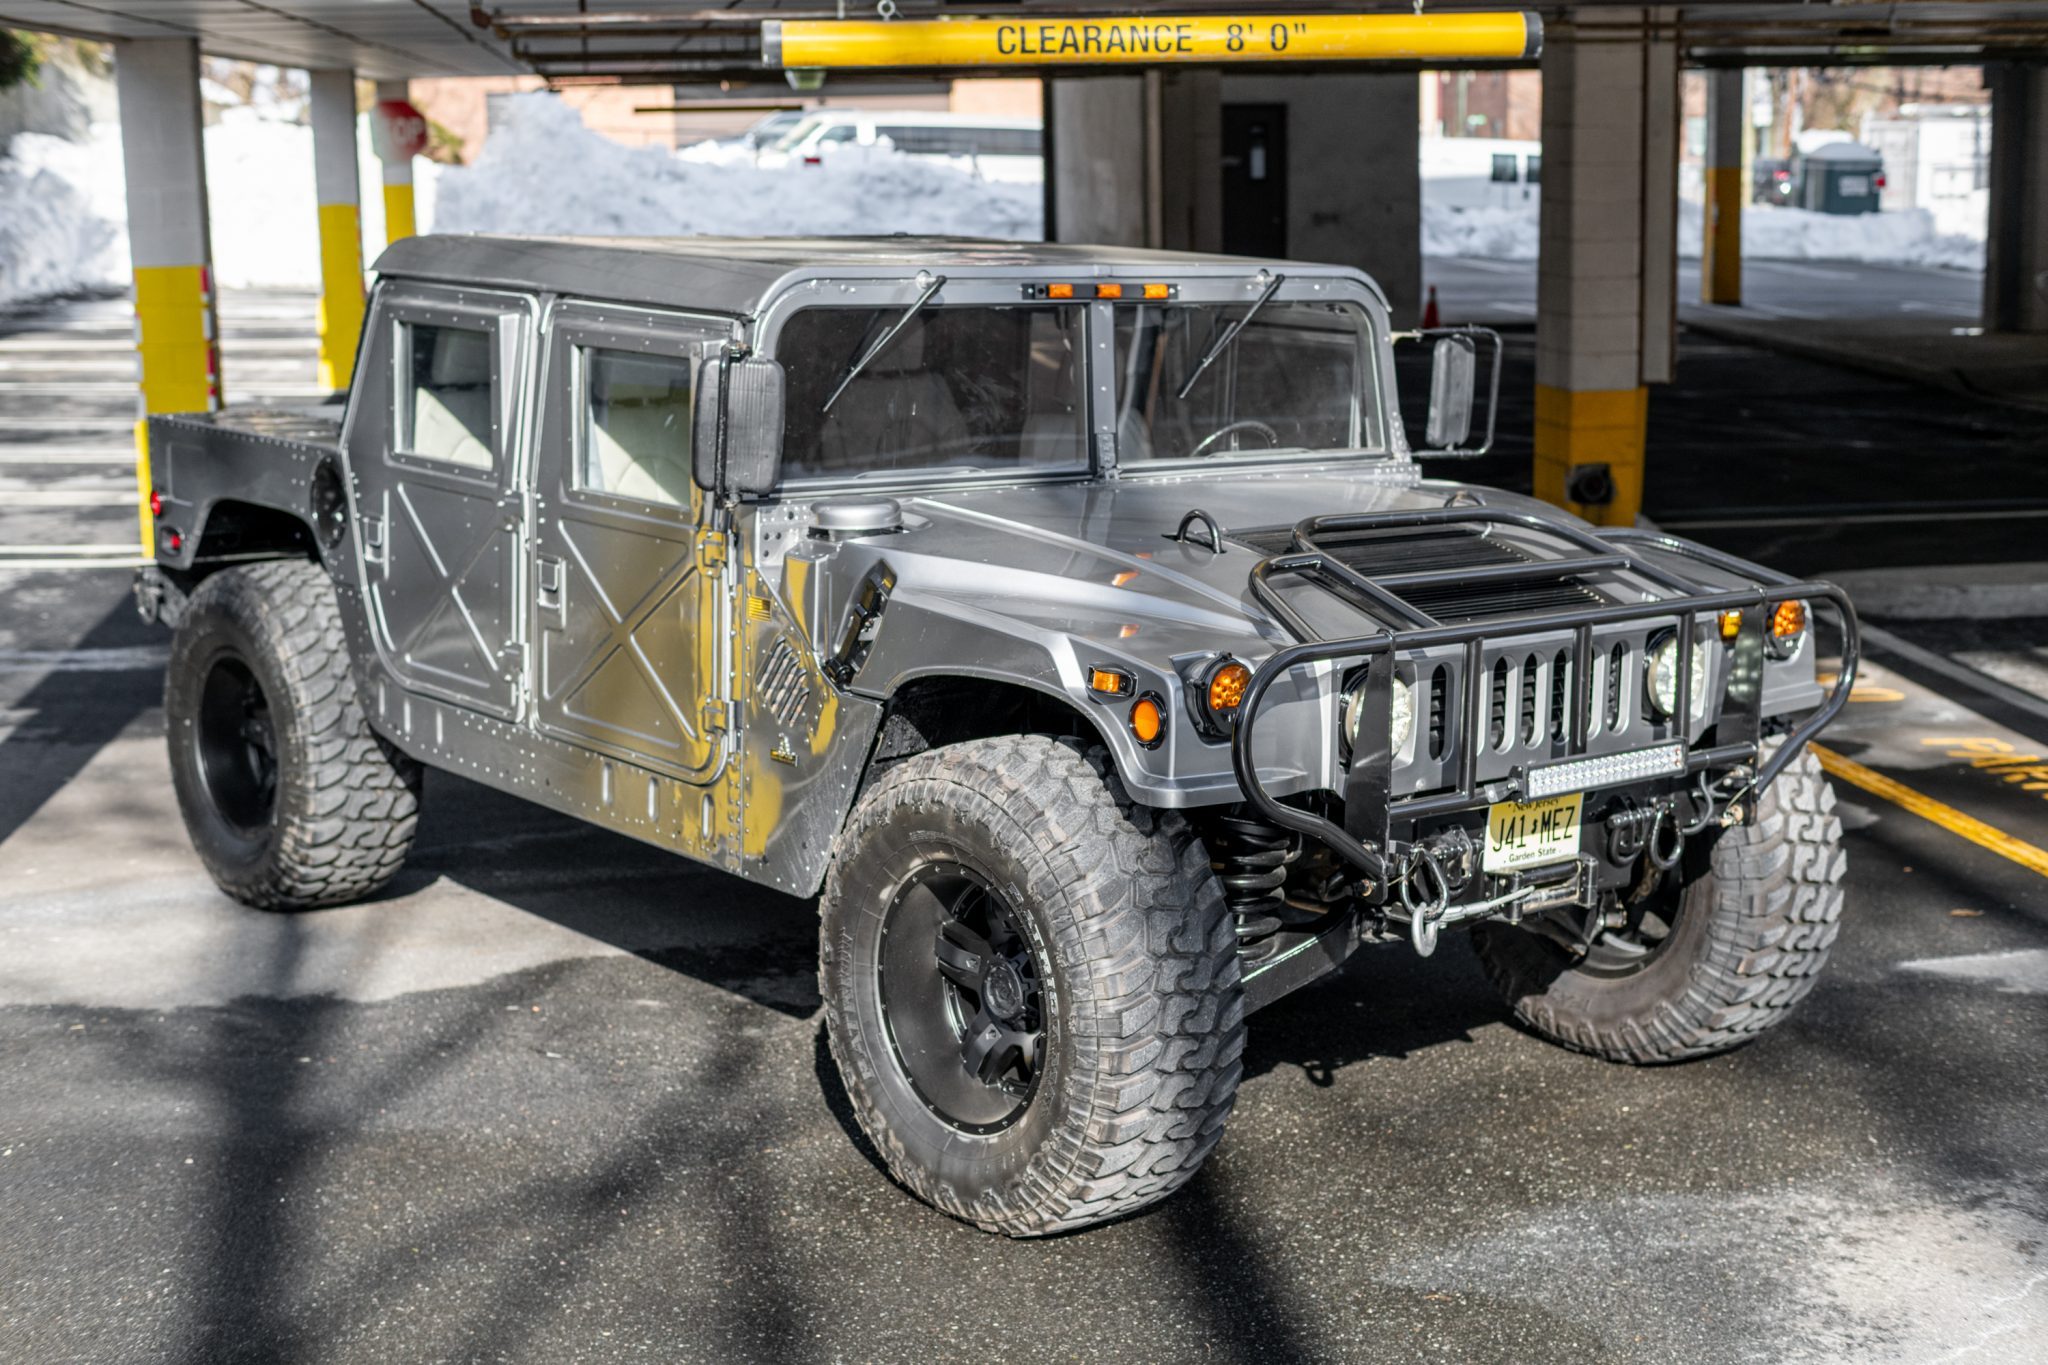 1995 Atomic Silver Hummer H1 on 40-in Tires, "That's How Ruff Ryders Roll"  - autoevolution